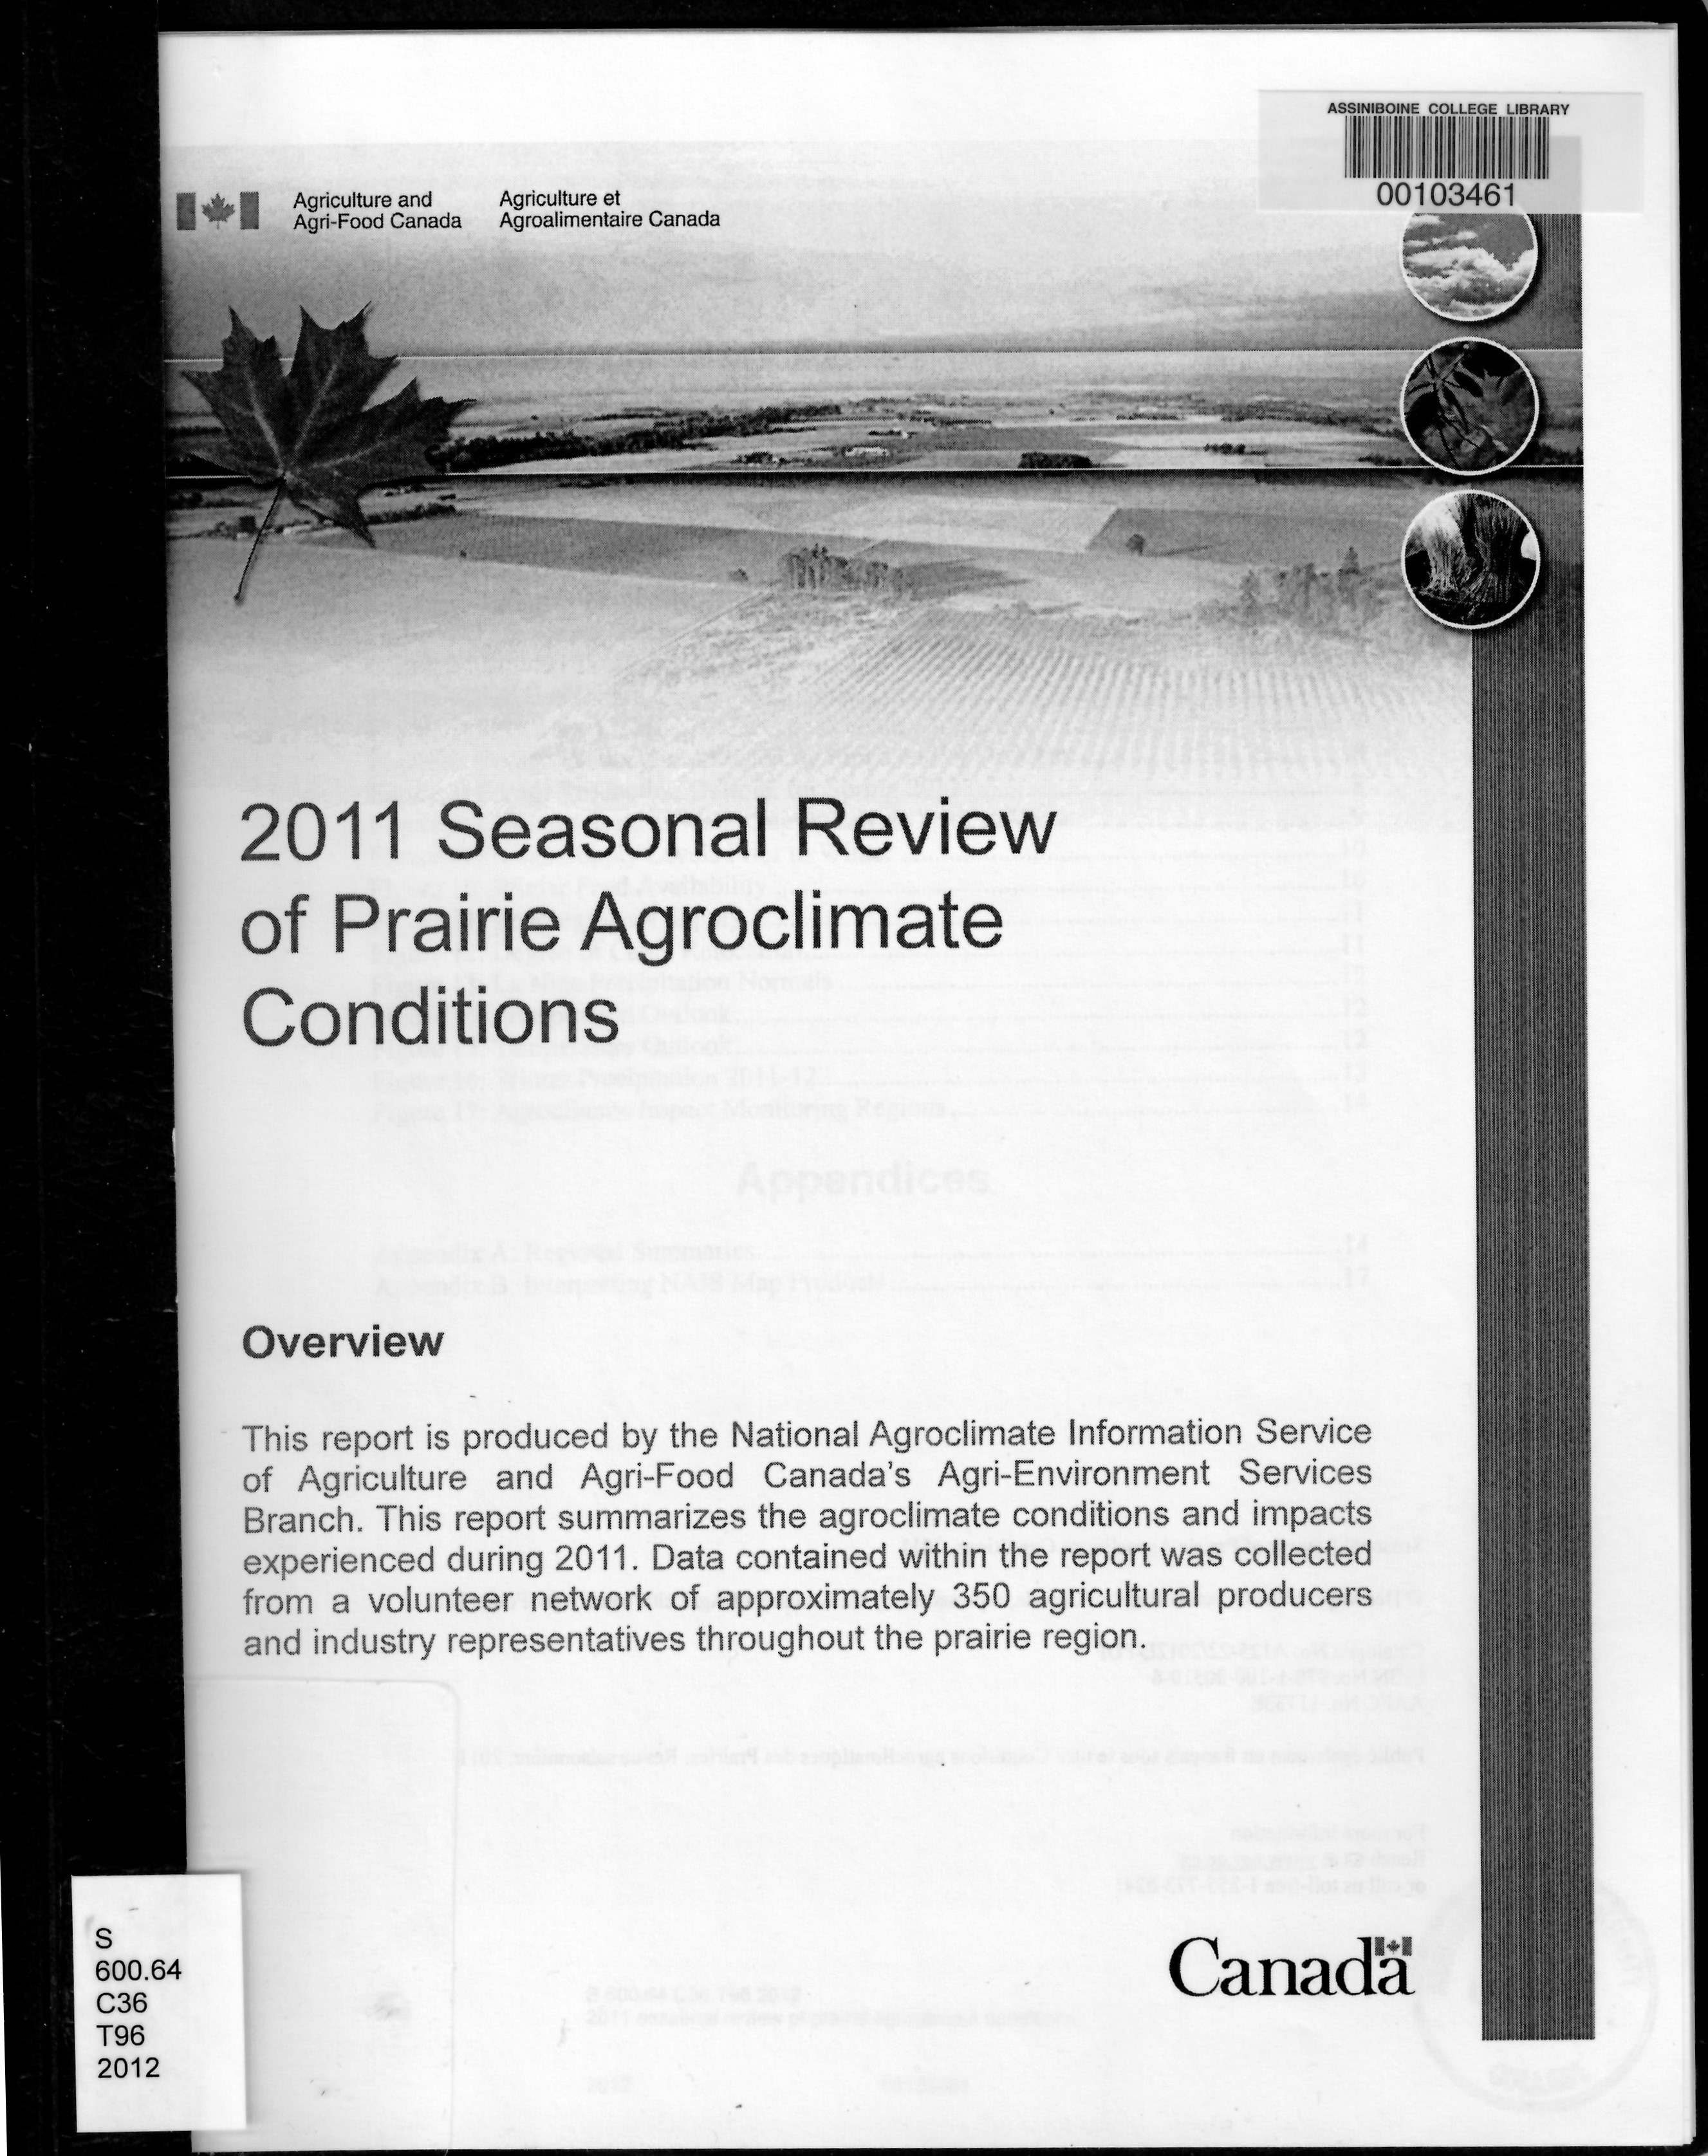 2011 seasonal review of prairie agroclimate conditions.